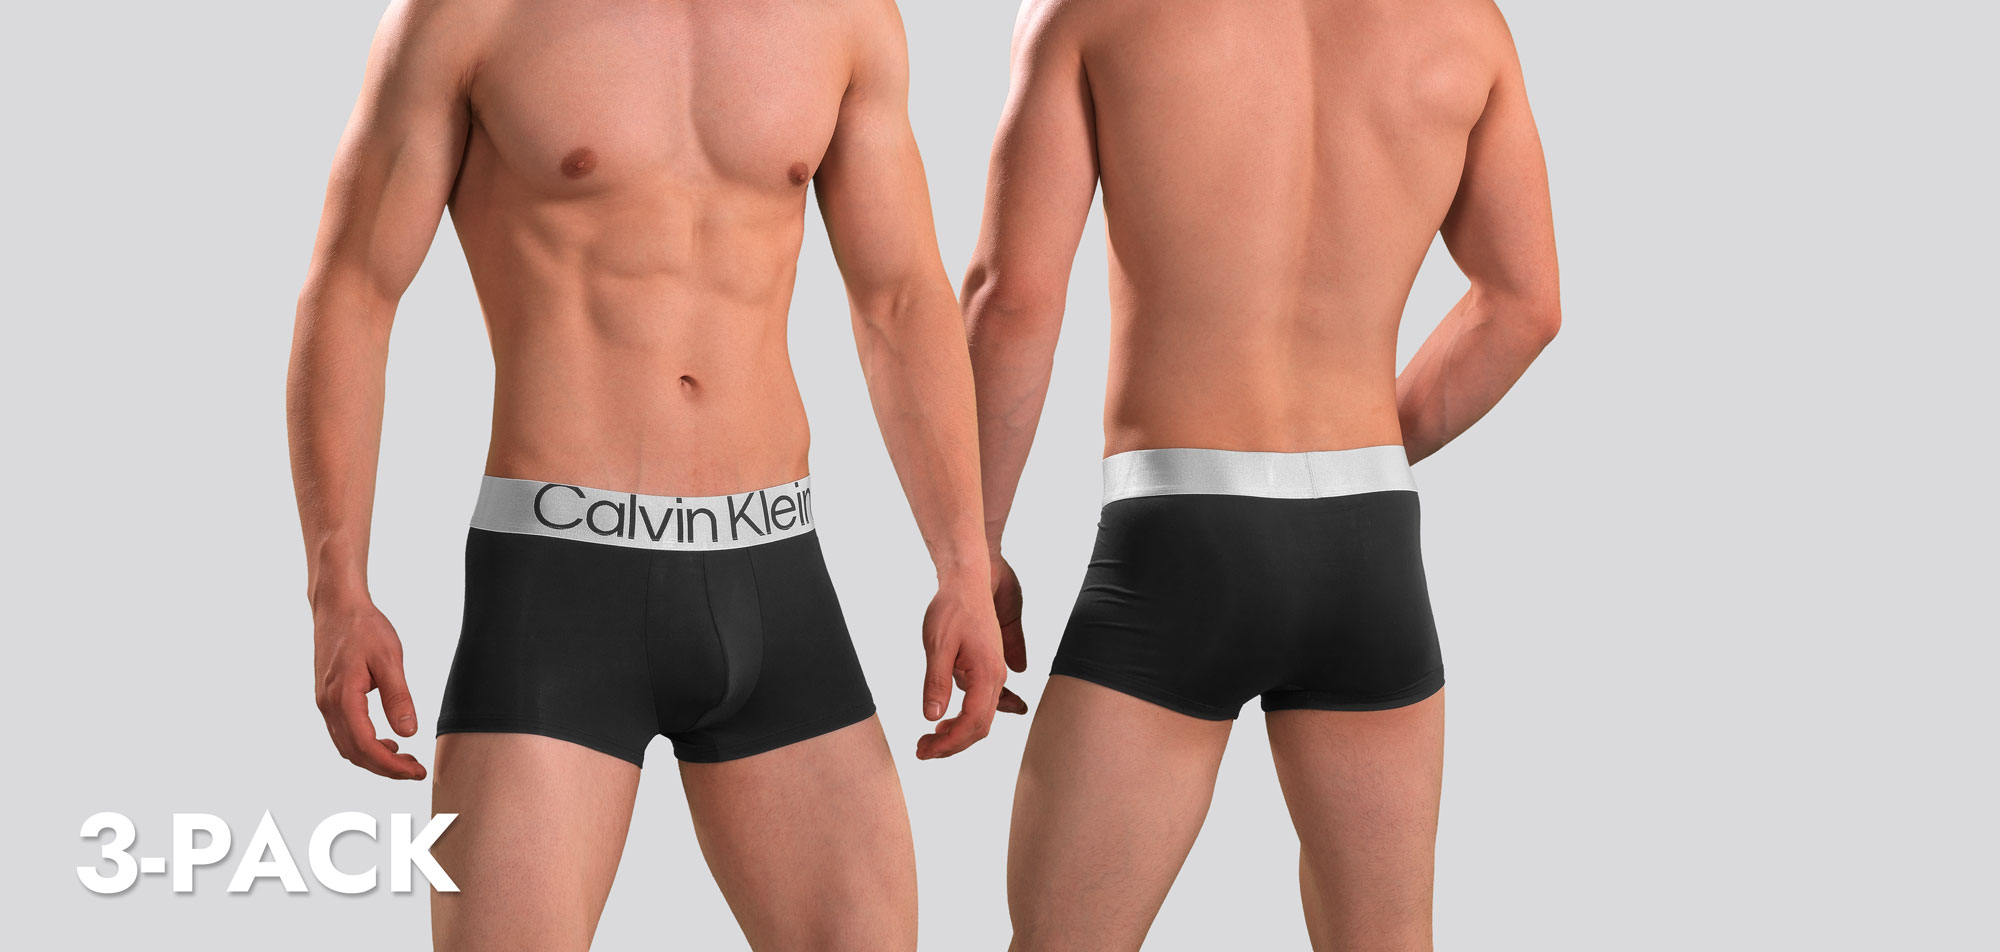 Calvin Klein Low Rise Trunk 3-pack NB3074A Microfiber Reconsidered Steel  #23086